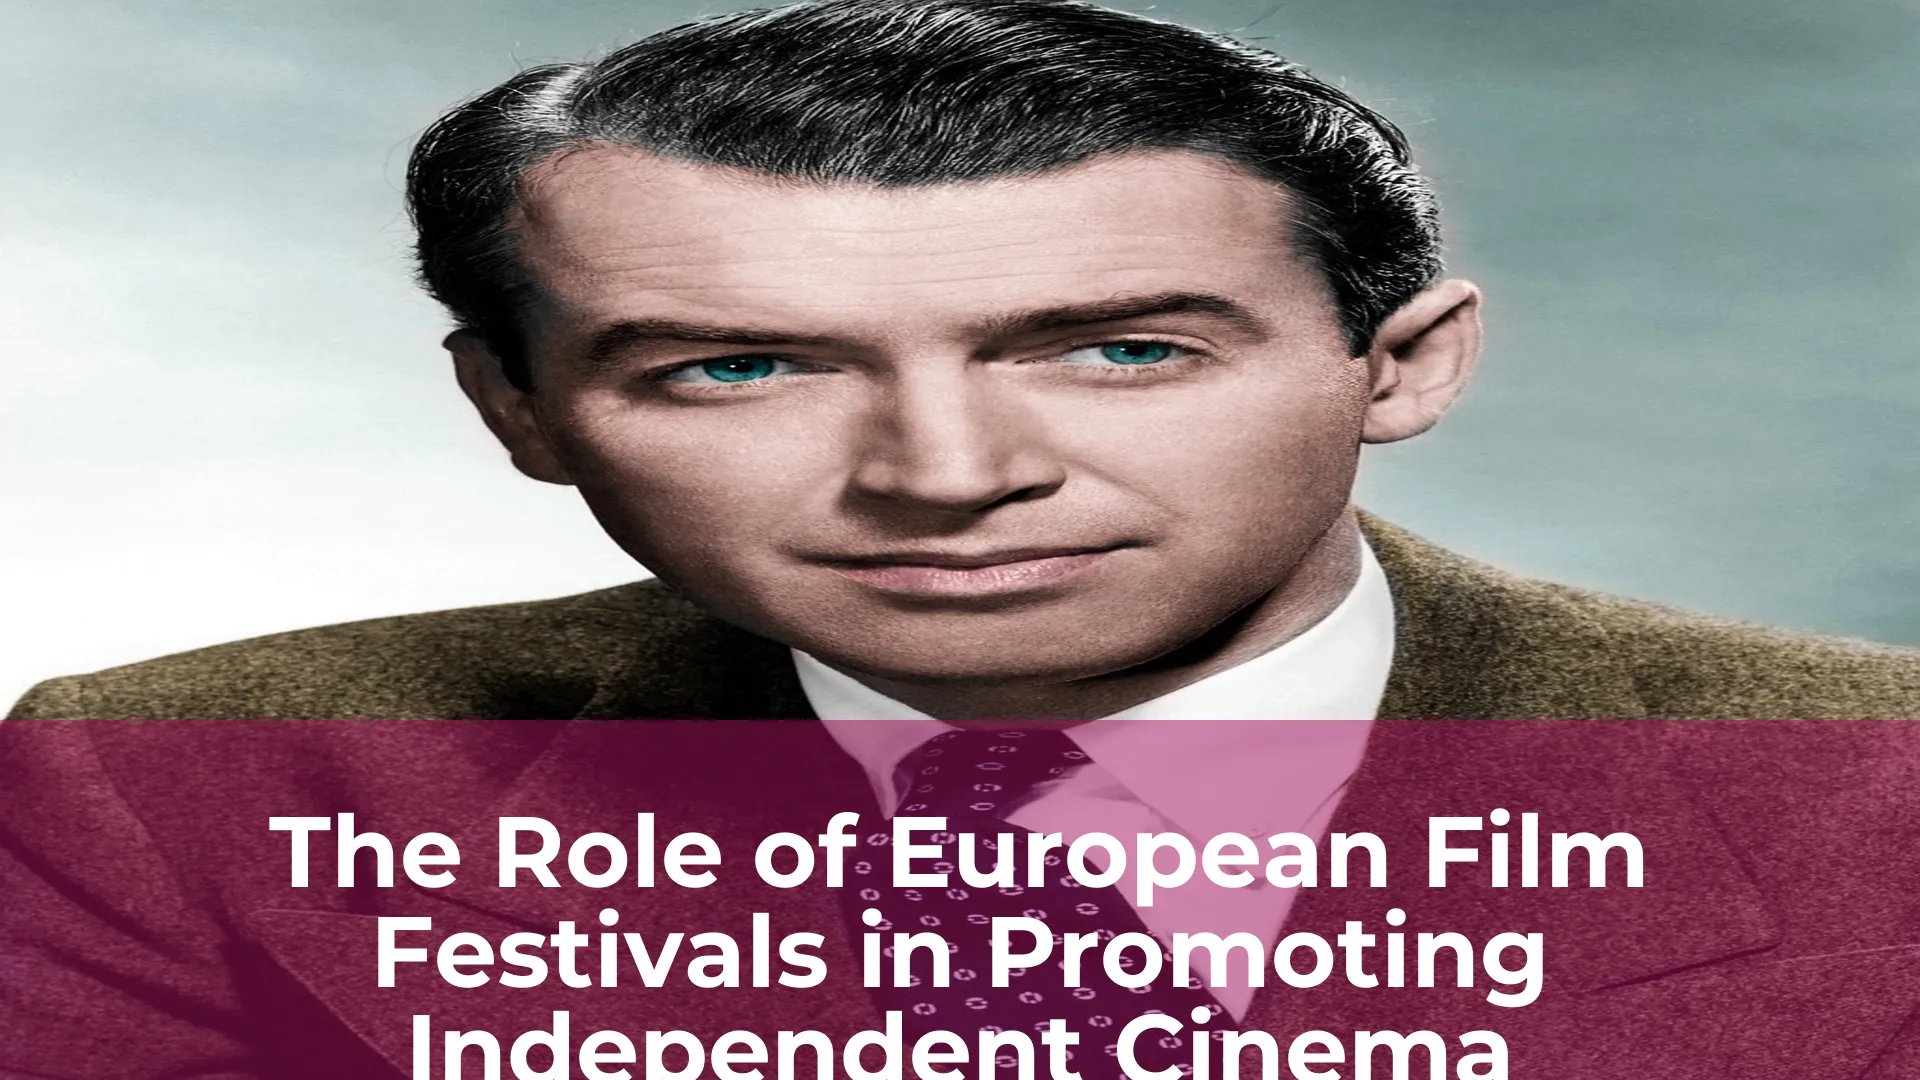 The role of european film festivals in promoting independent cinema